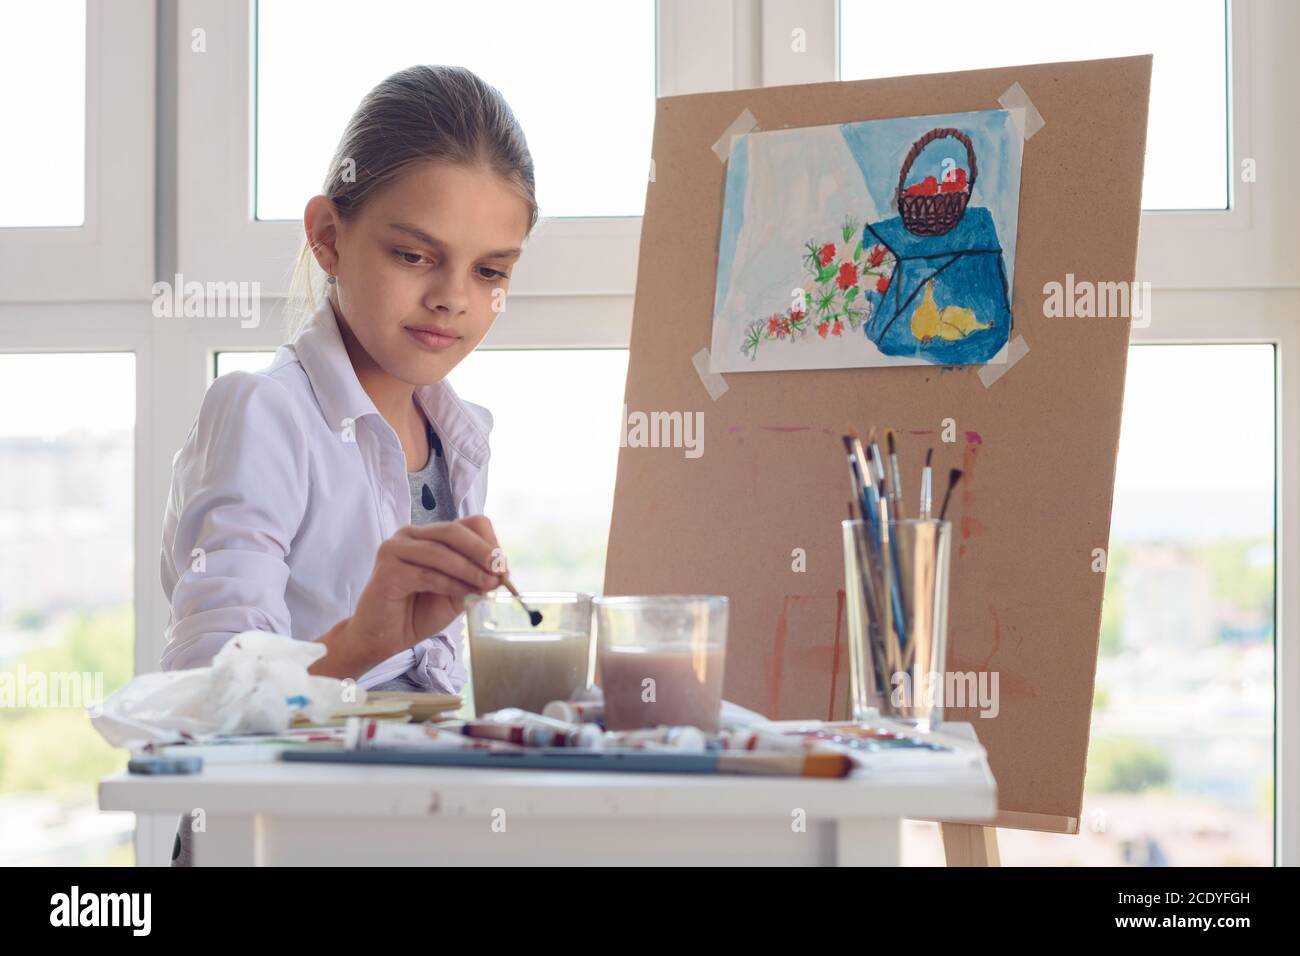 girl sits behind an easel and washes her brush in a glass of water Stock Photo